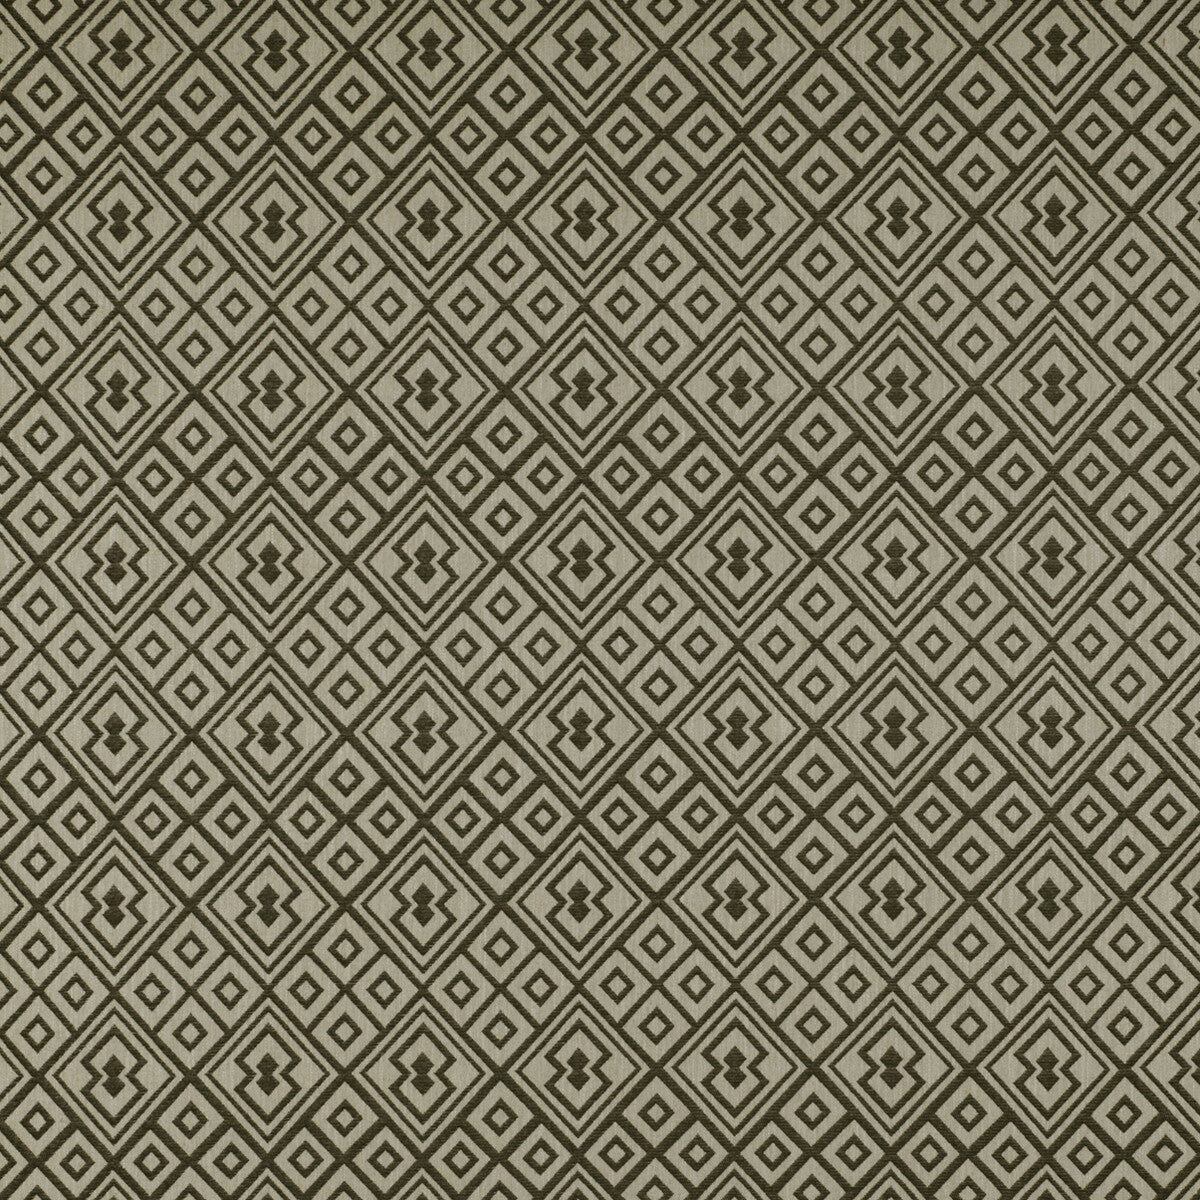 Bergamo fabric in onyx color - pattern GDT5325.001.0 - by Gaston y Daniela in the Tierras collection